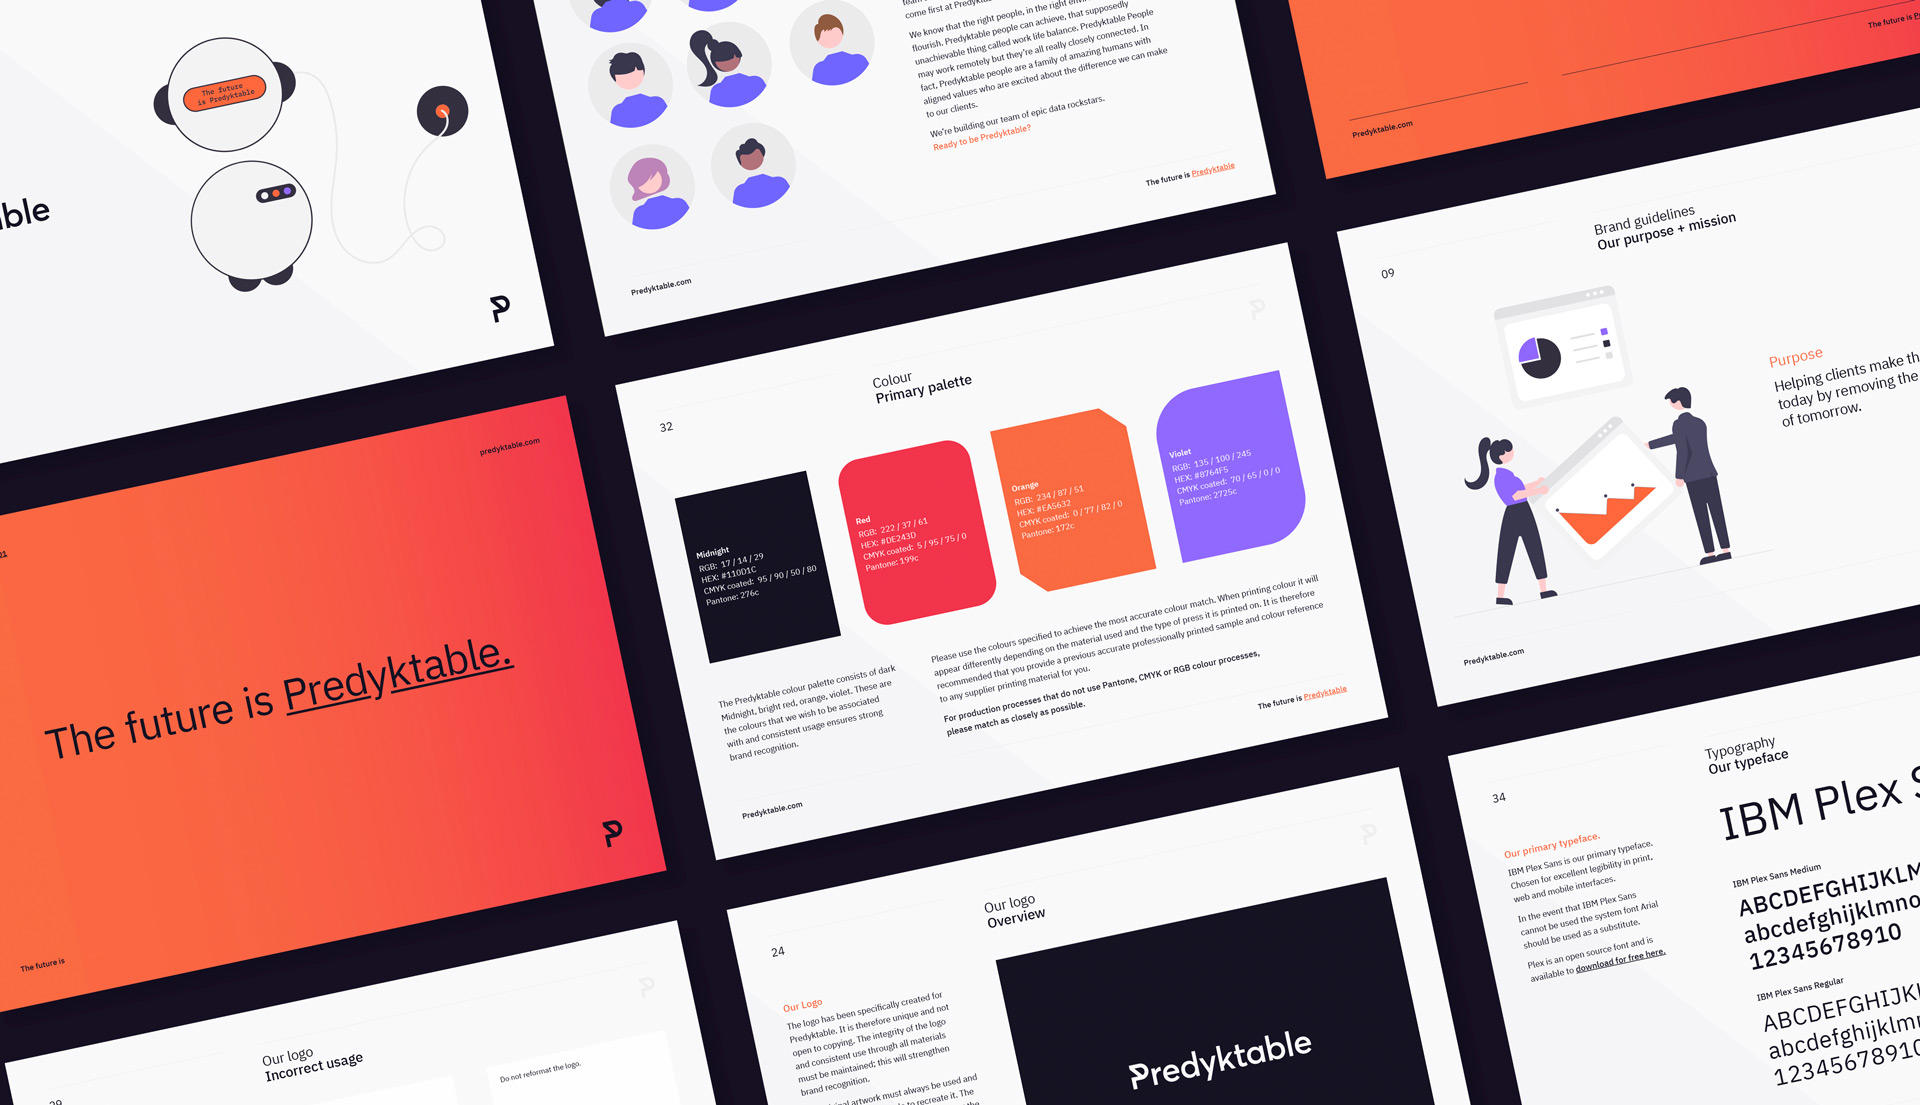 pages from the brand book created for Predyktable